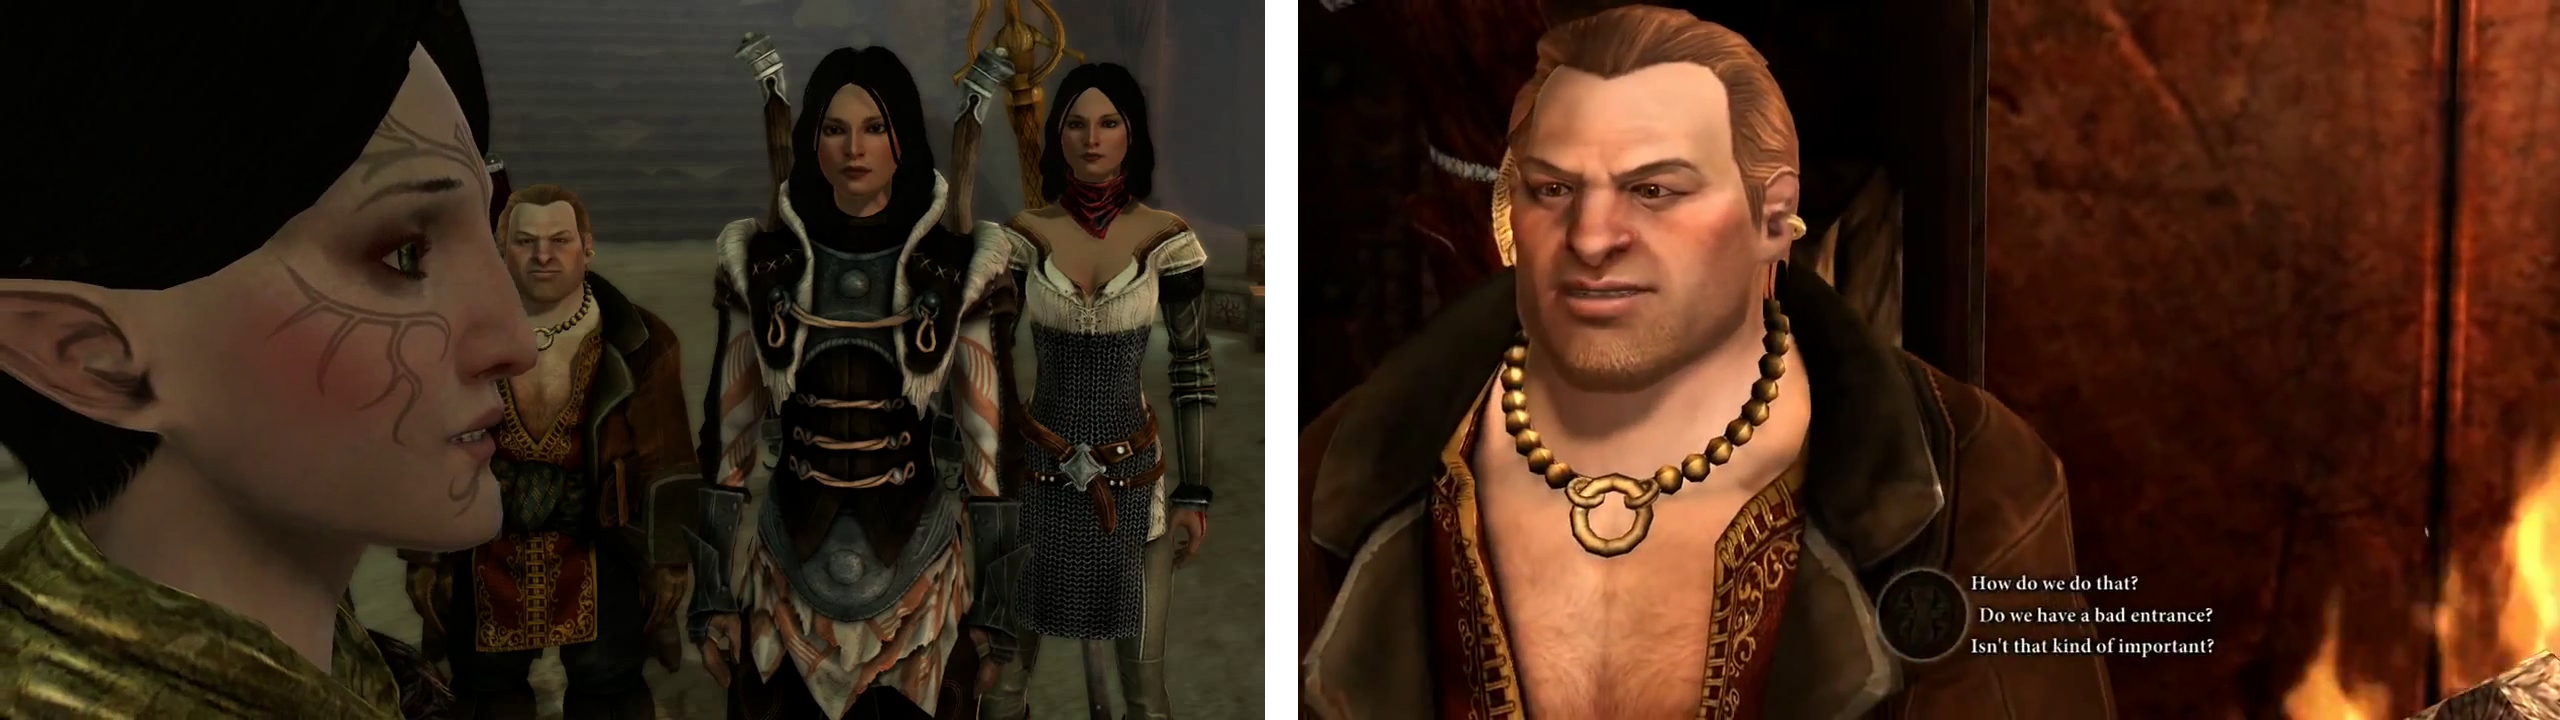 Merrill (left) and Varric (right).